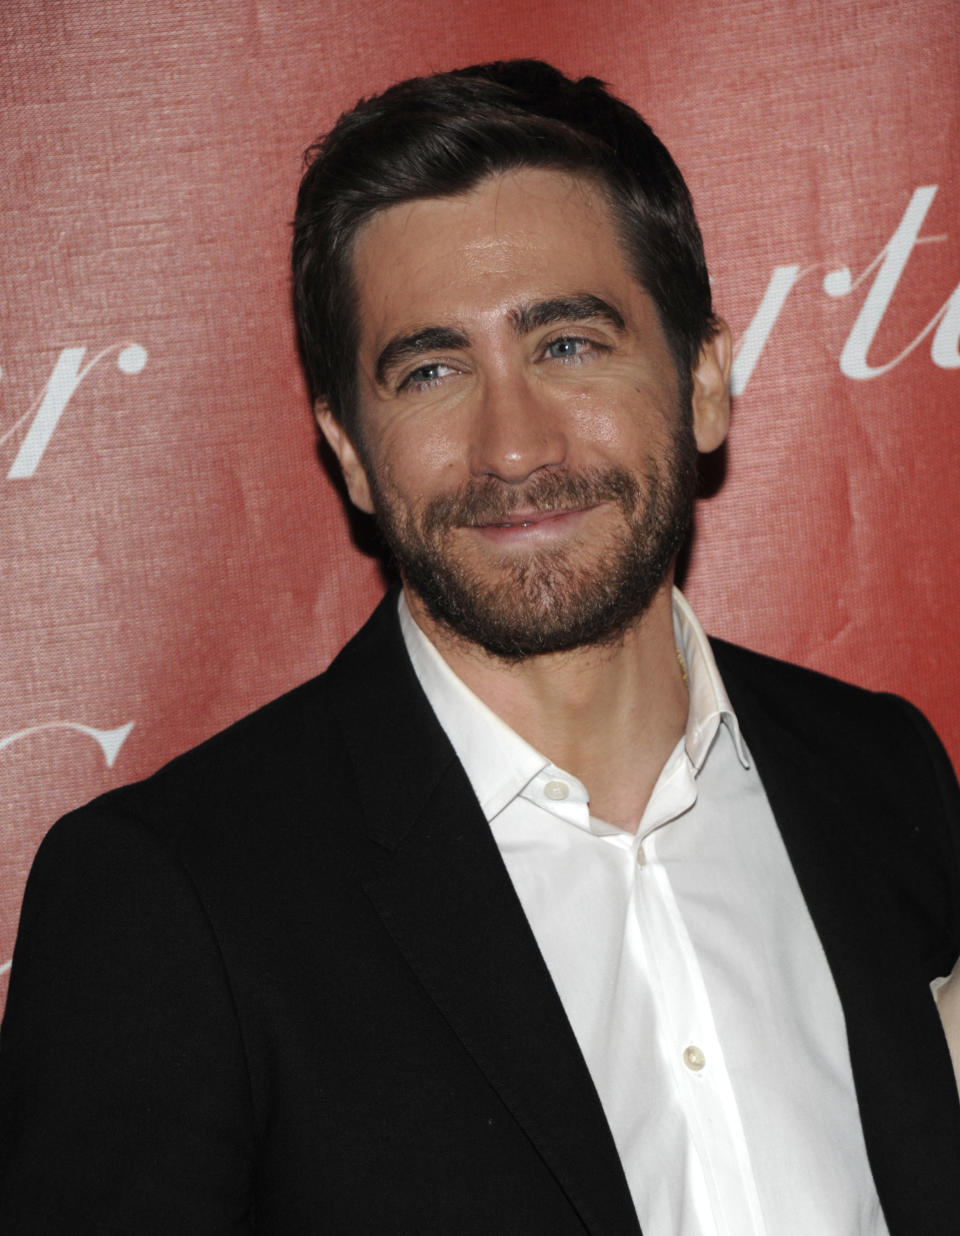 Hollywood hunk Jake Gyllenhaal has faced gay rumors since he played a closeted gay cowboy in the academy-award winning film "Brokeback Mountain." Gyllenhaal denounced such accusations when he <a href="http://instinctmagazine.com/blogs/blog/jake-gyllenhaal-tackles-gay-rumors?directory=100011">appeared on "Jimmy Kimmel Live"</a> in 2011, speaking about his relationship with his best friend and stylist whom he calls "baby." Longtime friend <a href="http://www.popeater.com/2010/09/24/adam-levine-out-interview/">Adam Levine called the rumors "very immature and infantile."</a>